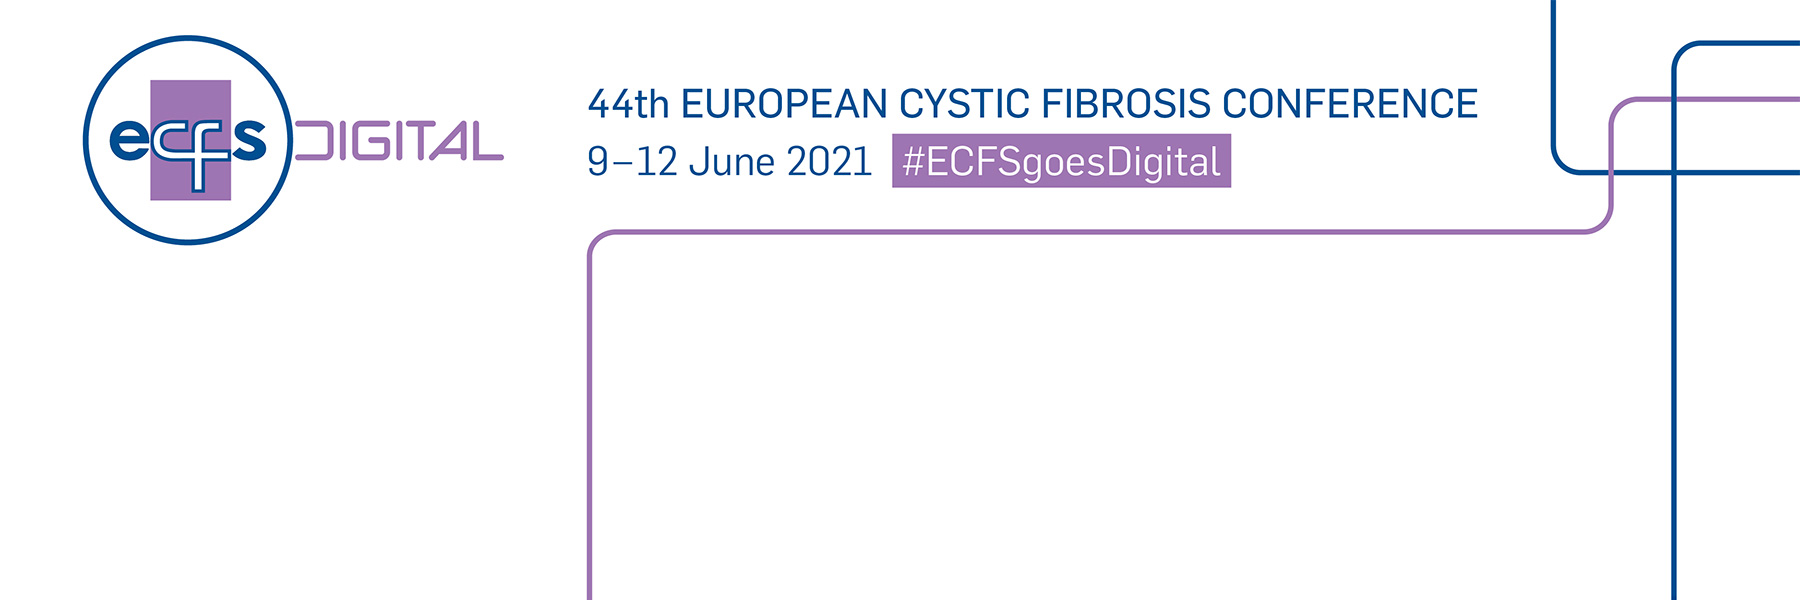 44th European Cystic Fibrosis Conference